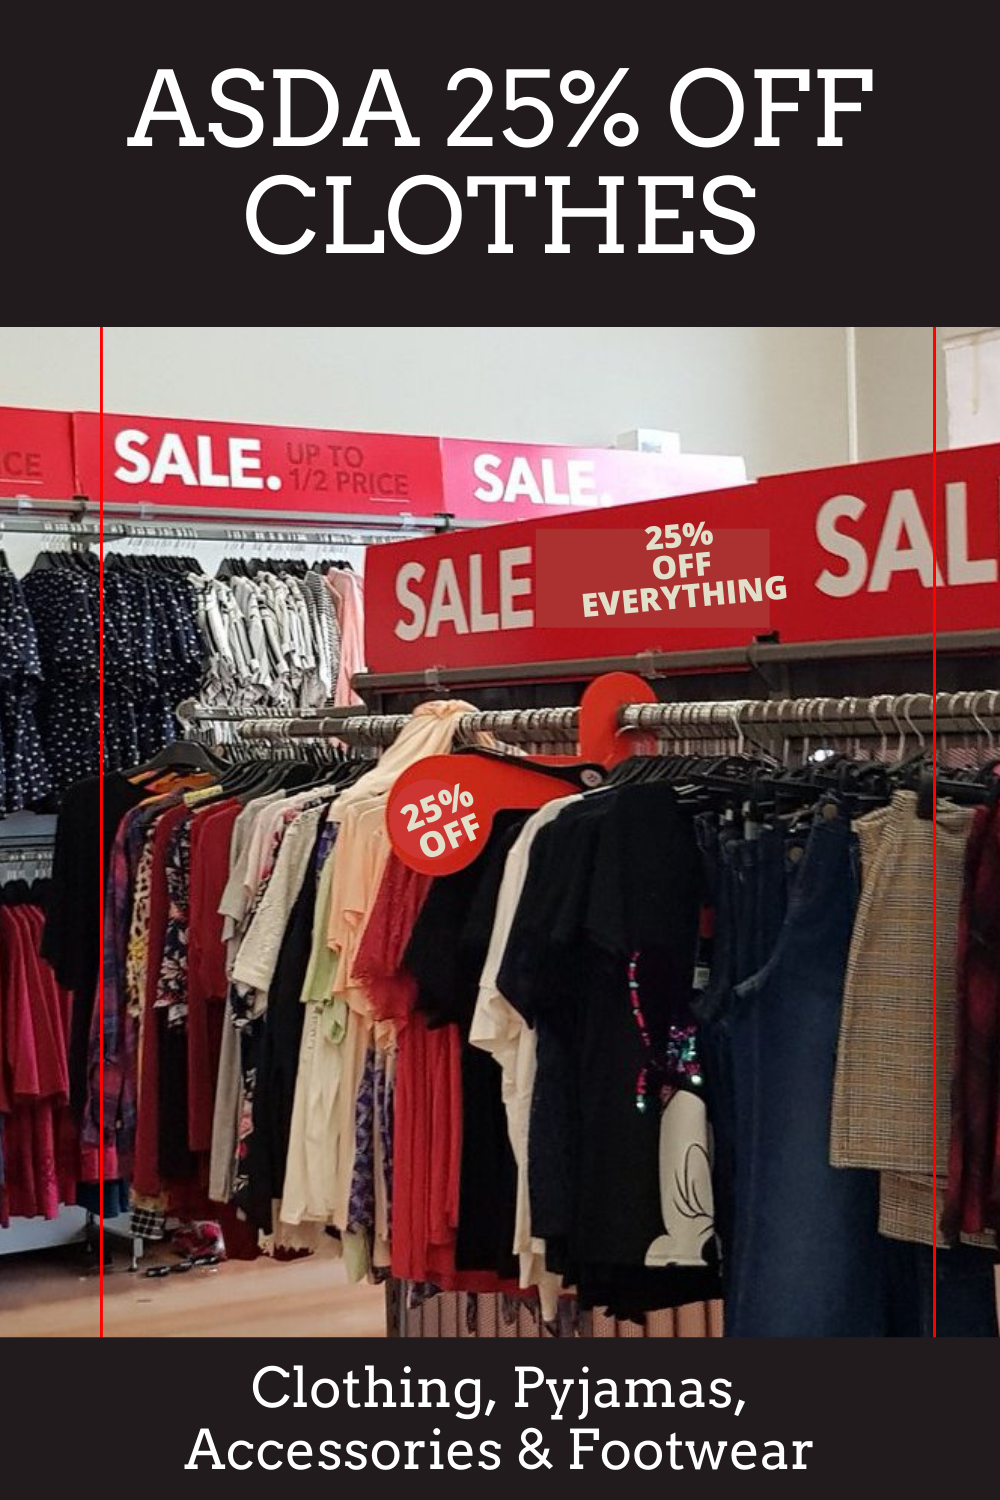 Asda 25% off Clothes - The Next George Sale Dates 2022